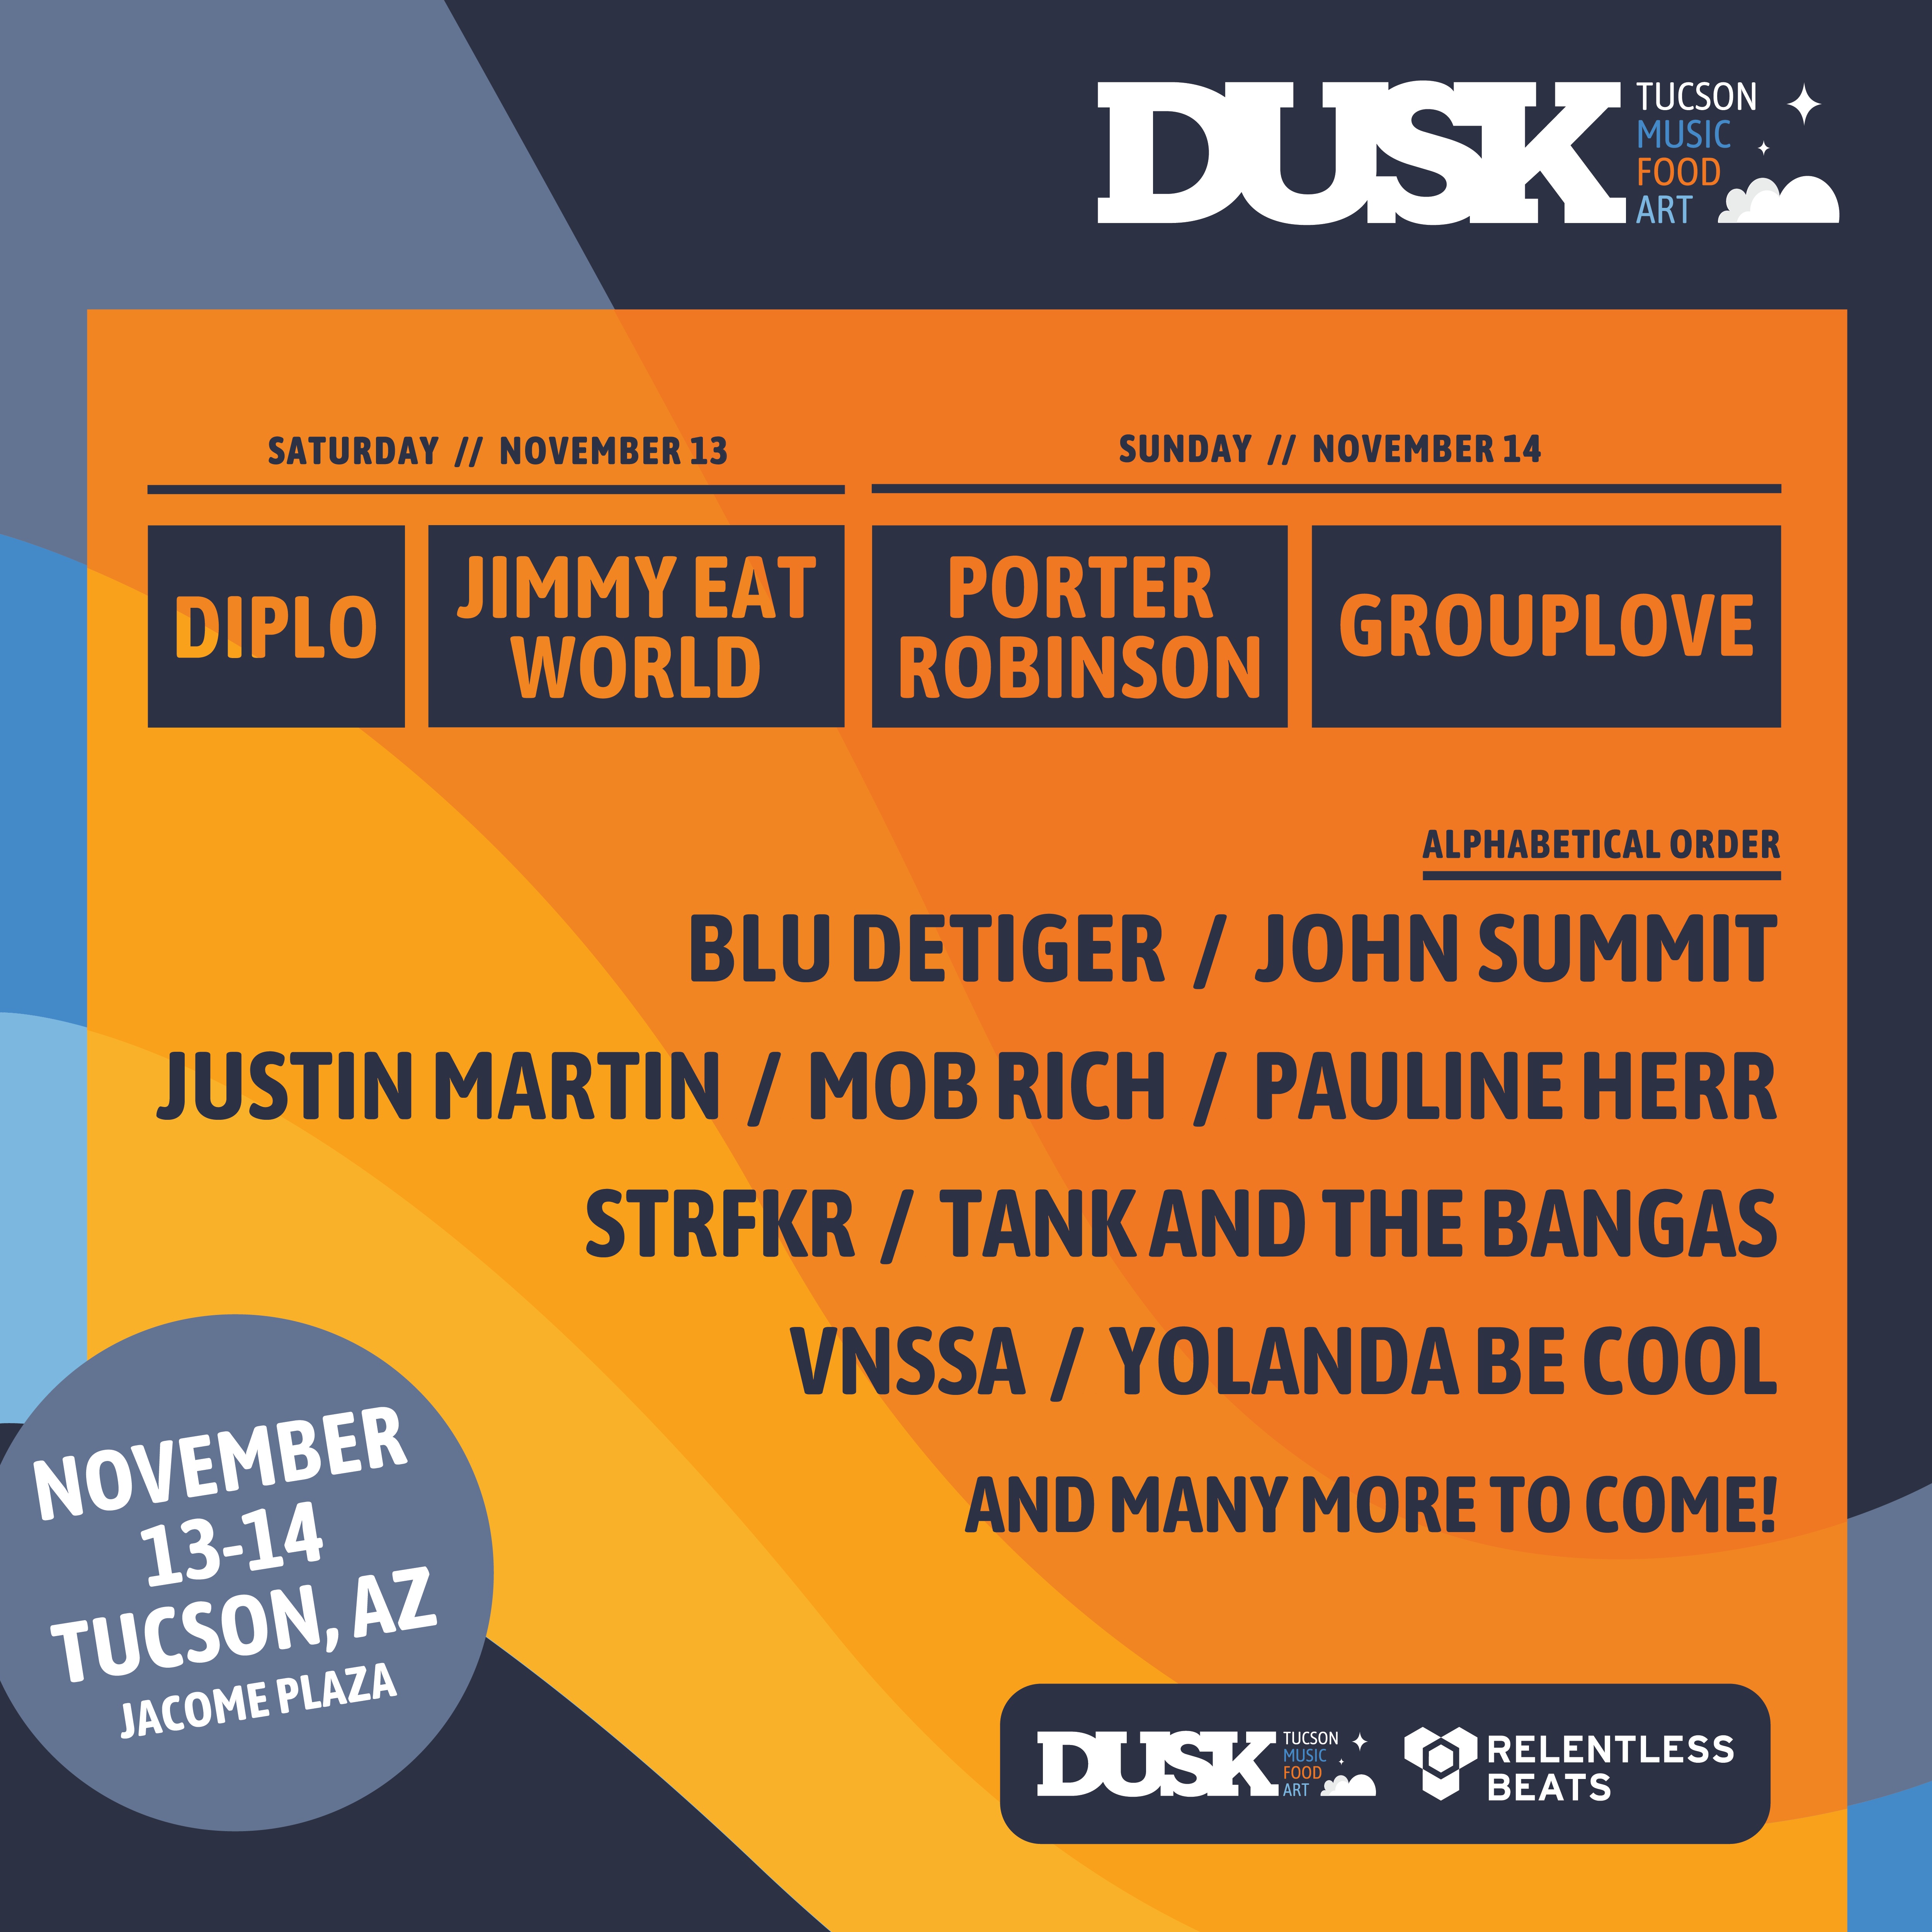 DUSK MUSIC FESTIVAL RETURNS WITH A SUNSETTING LINEUP